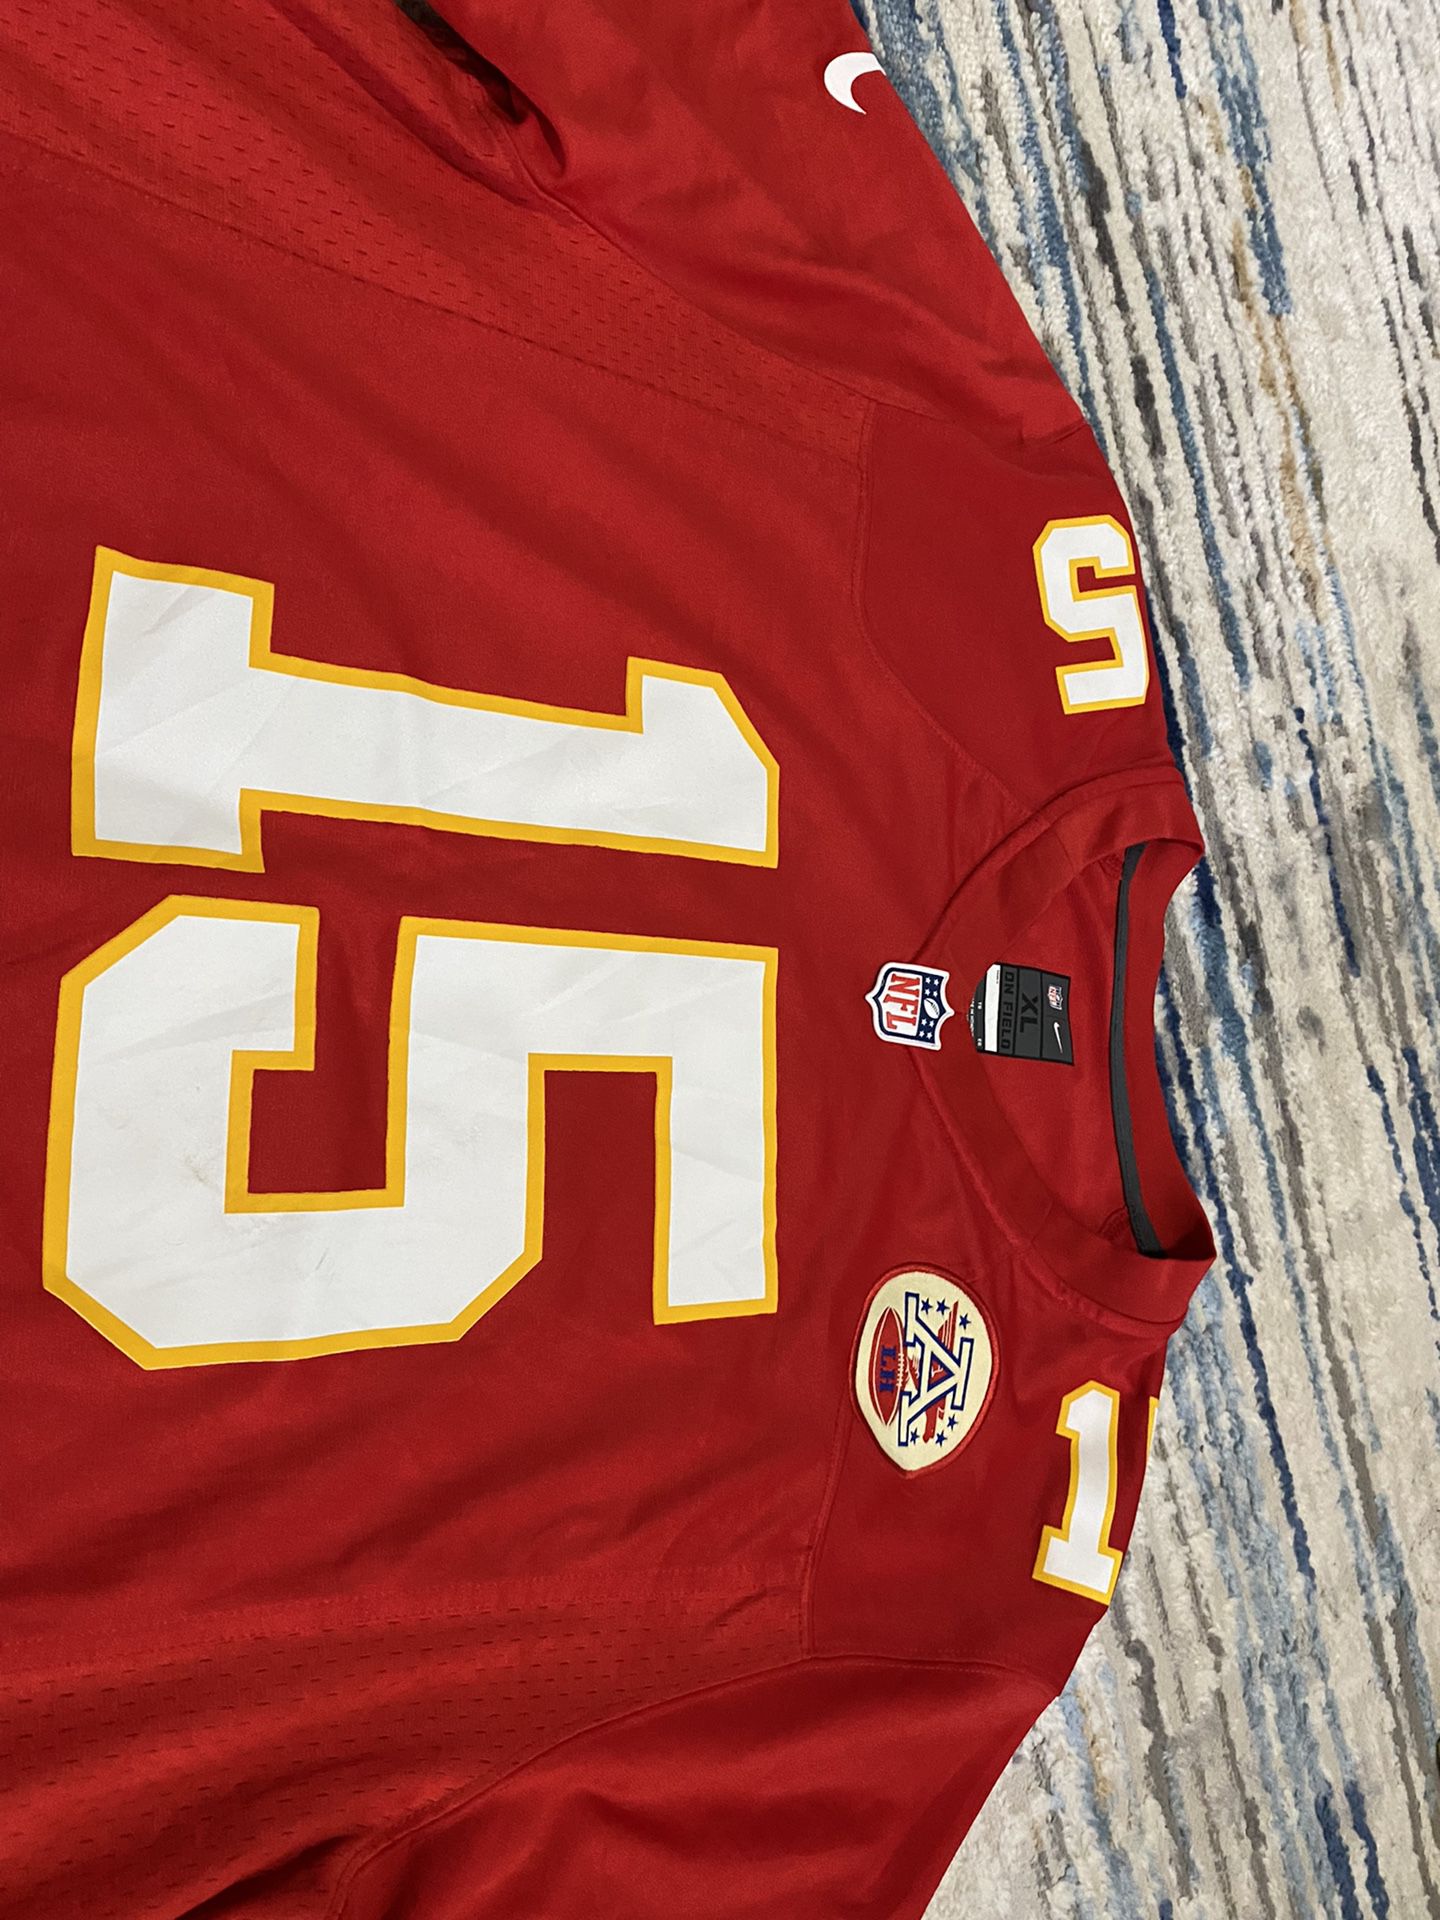 Patrick Mahomes Jersey - XL for Sale in Lucas, TX - OfferUp